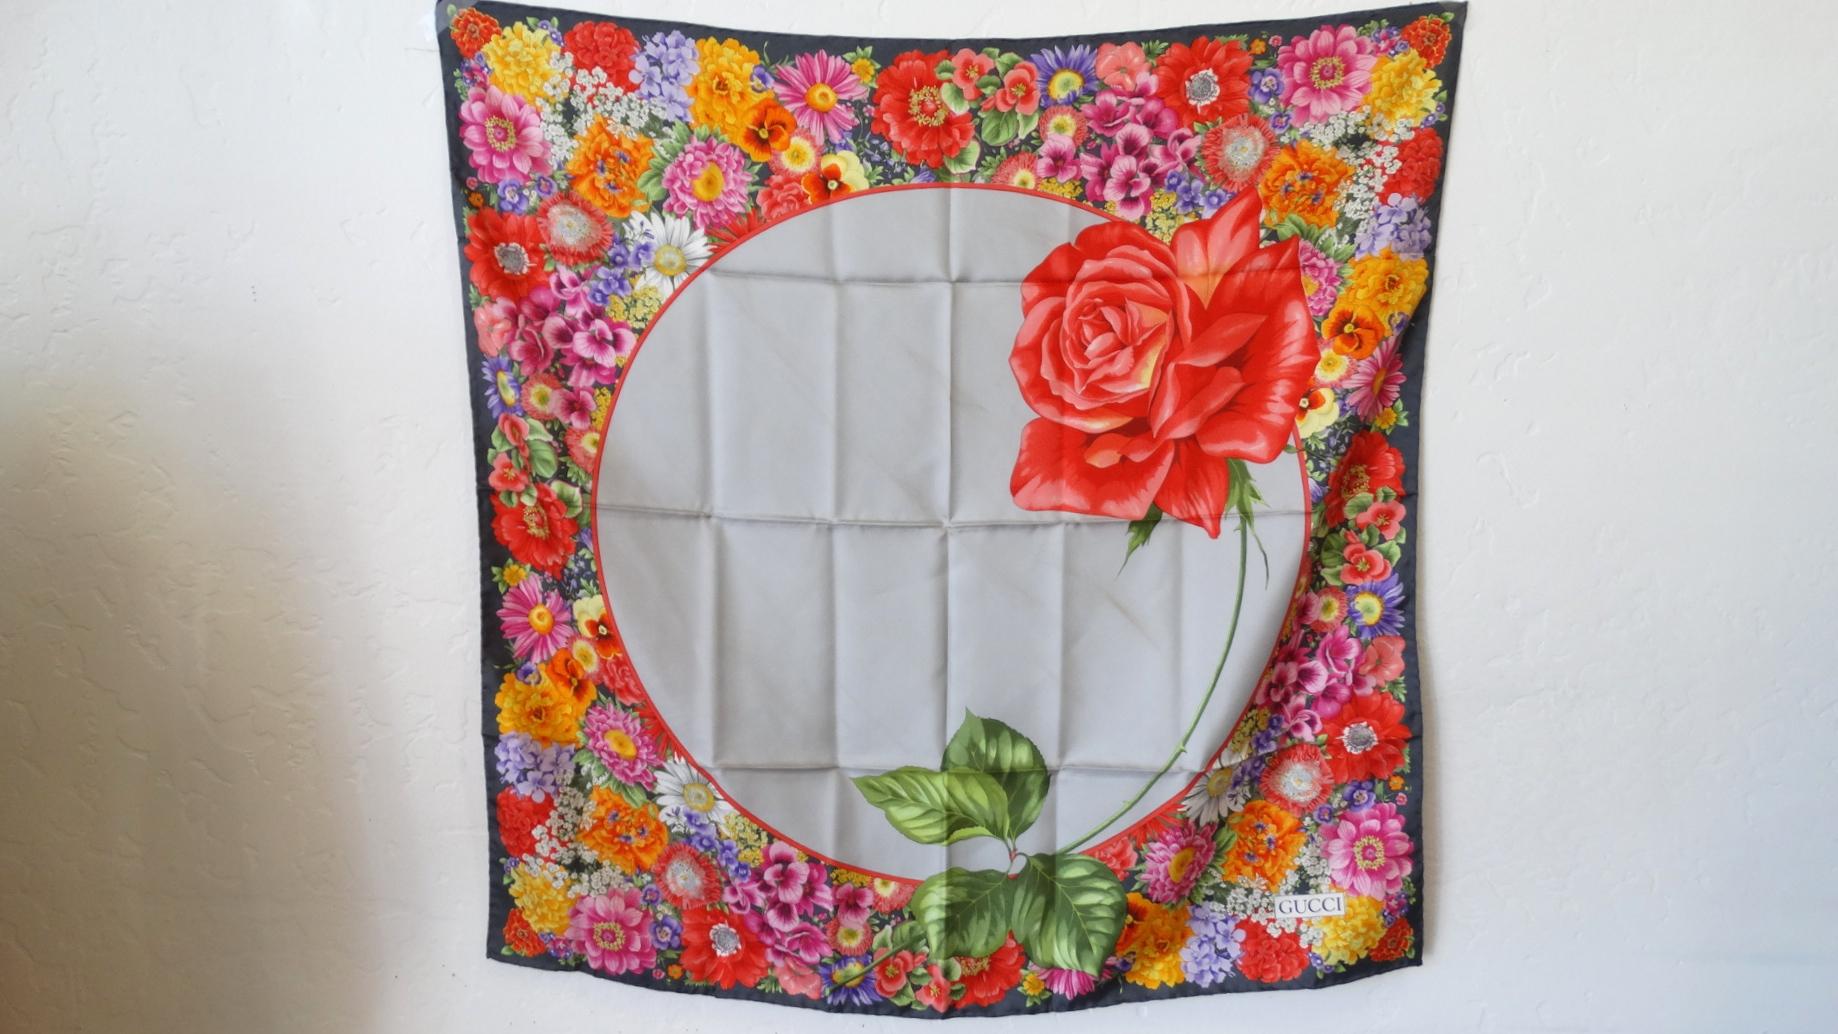 Gorgeous, Vibrant and Gucci, What More Could You Ask For In A Scarf!? Circa 1980s, this Gucci scarf features a dark pearly grey trim and a colorful floral motif boarder with a silver circle in the center, accented with a large blooming rose. 